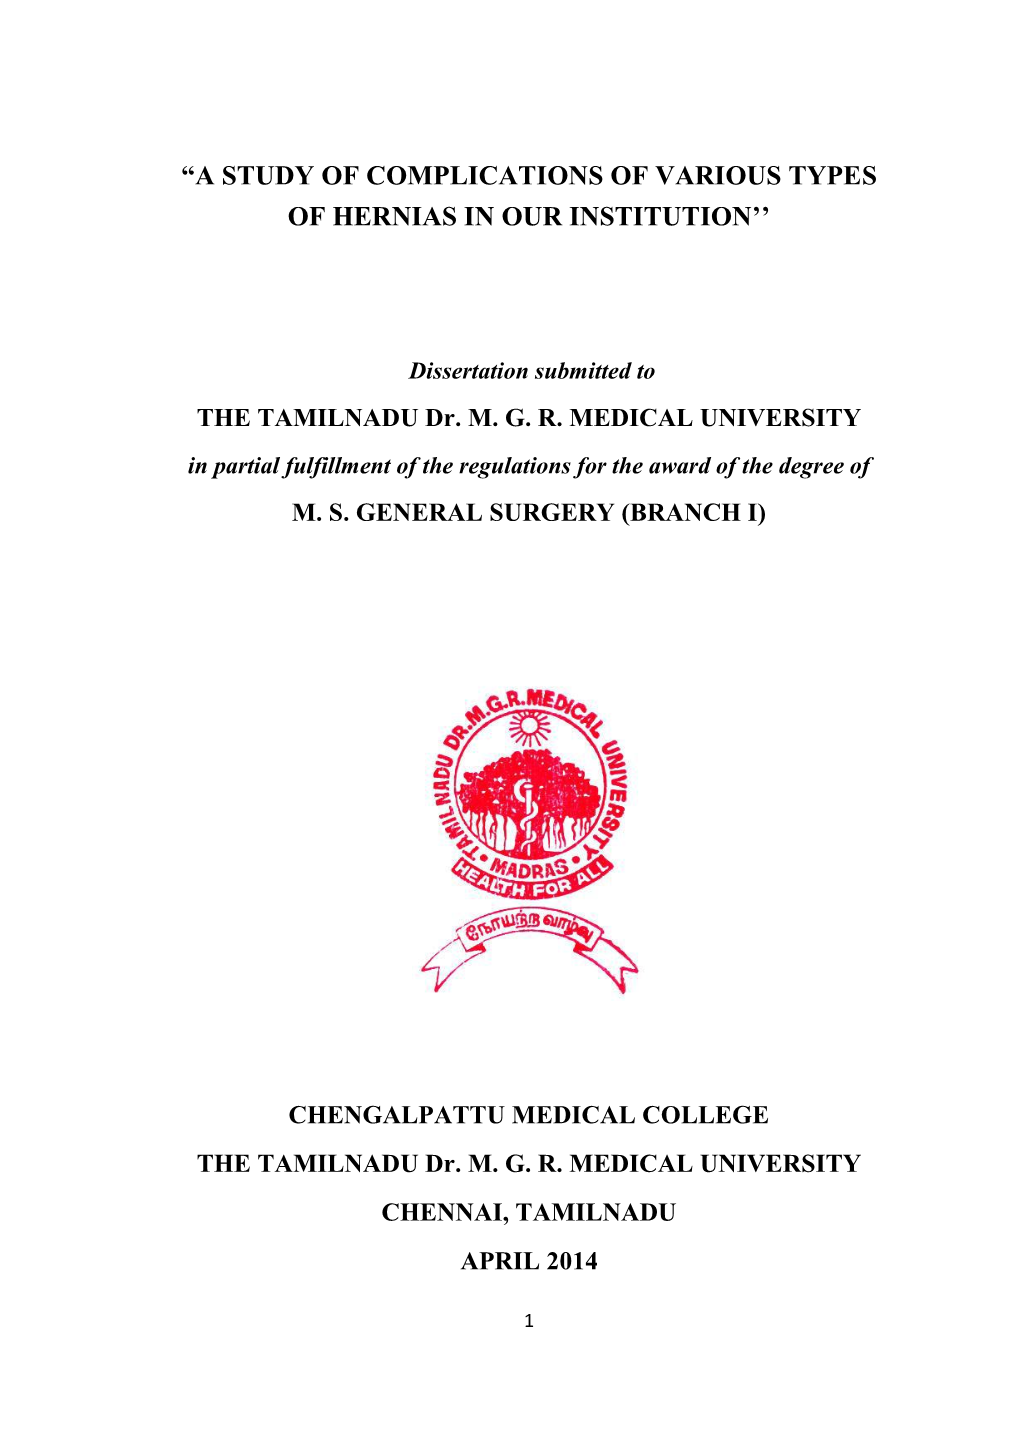 A Study of Complications of Various Types of Hernias in Our Institution’’